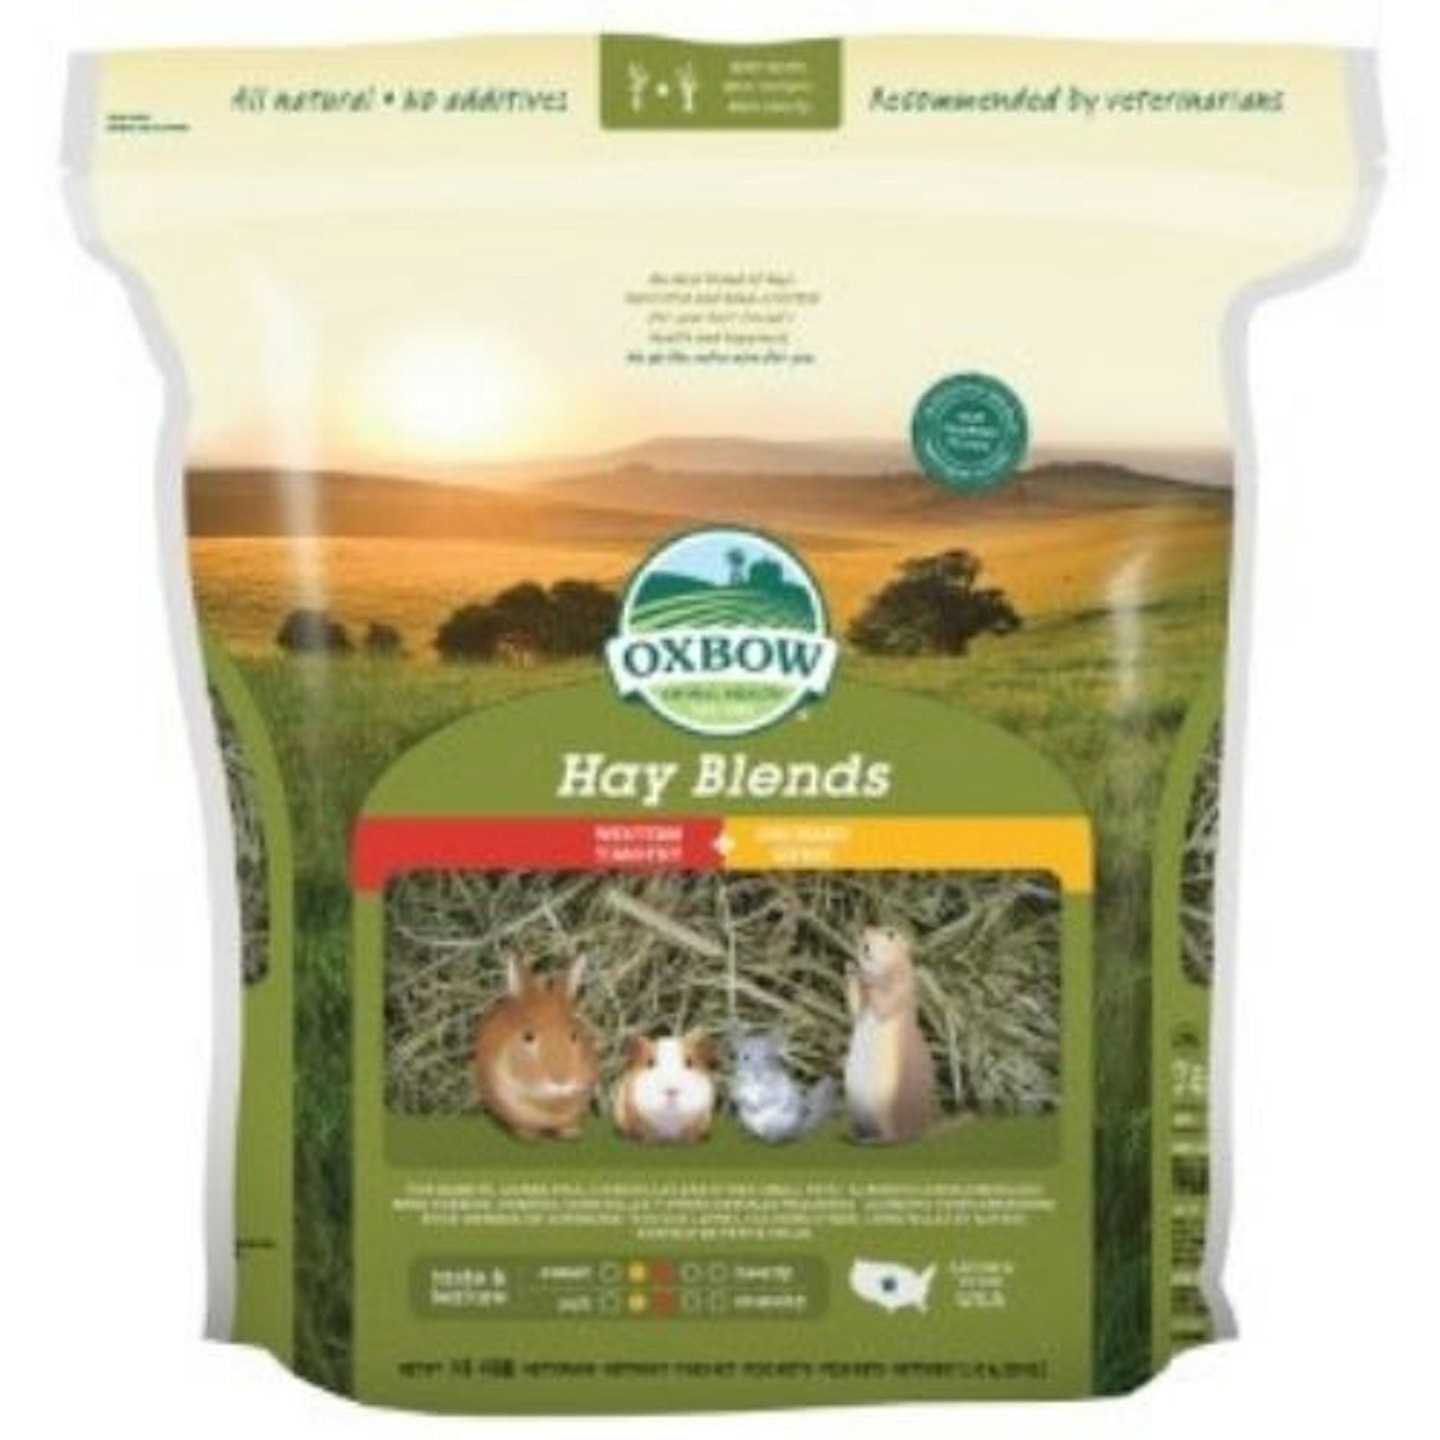 Oxbow Hay Blends Western Timothy and Orchard Grass 2.55kg